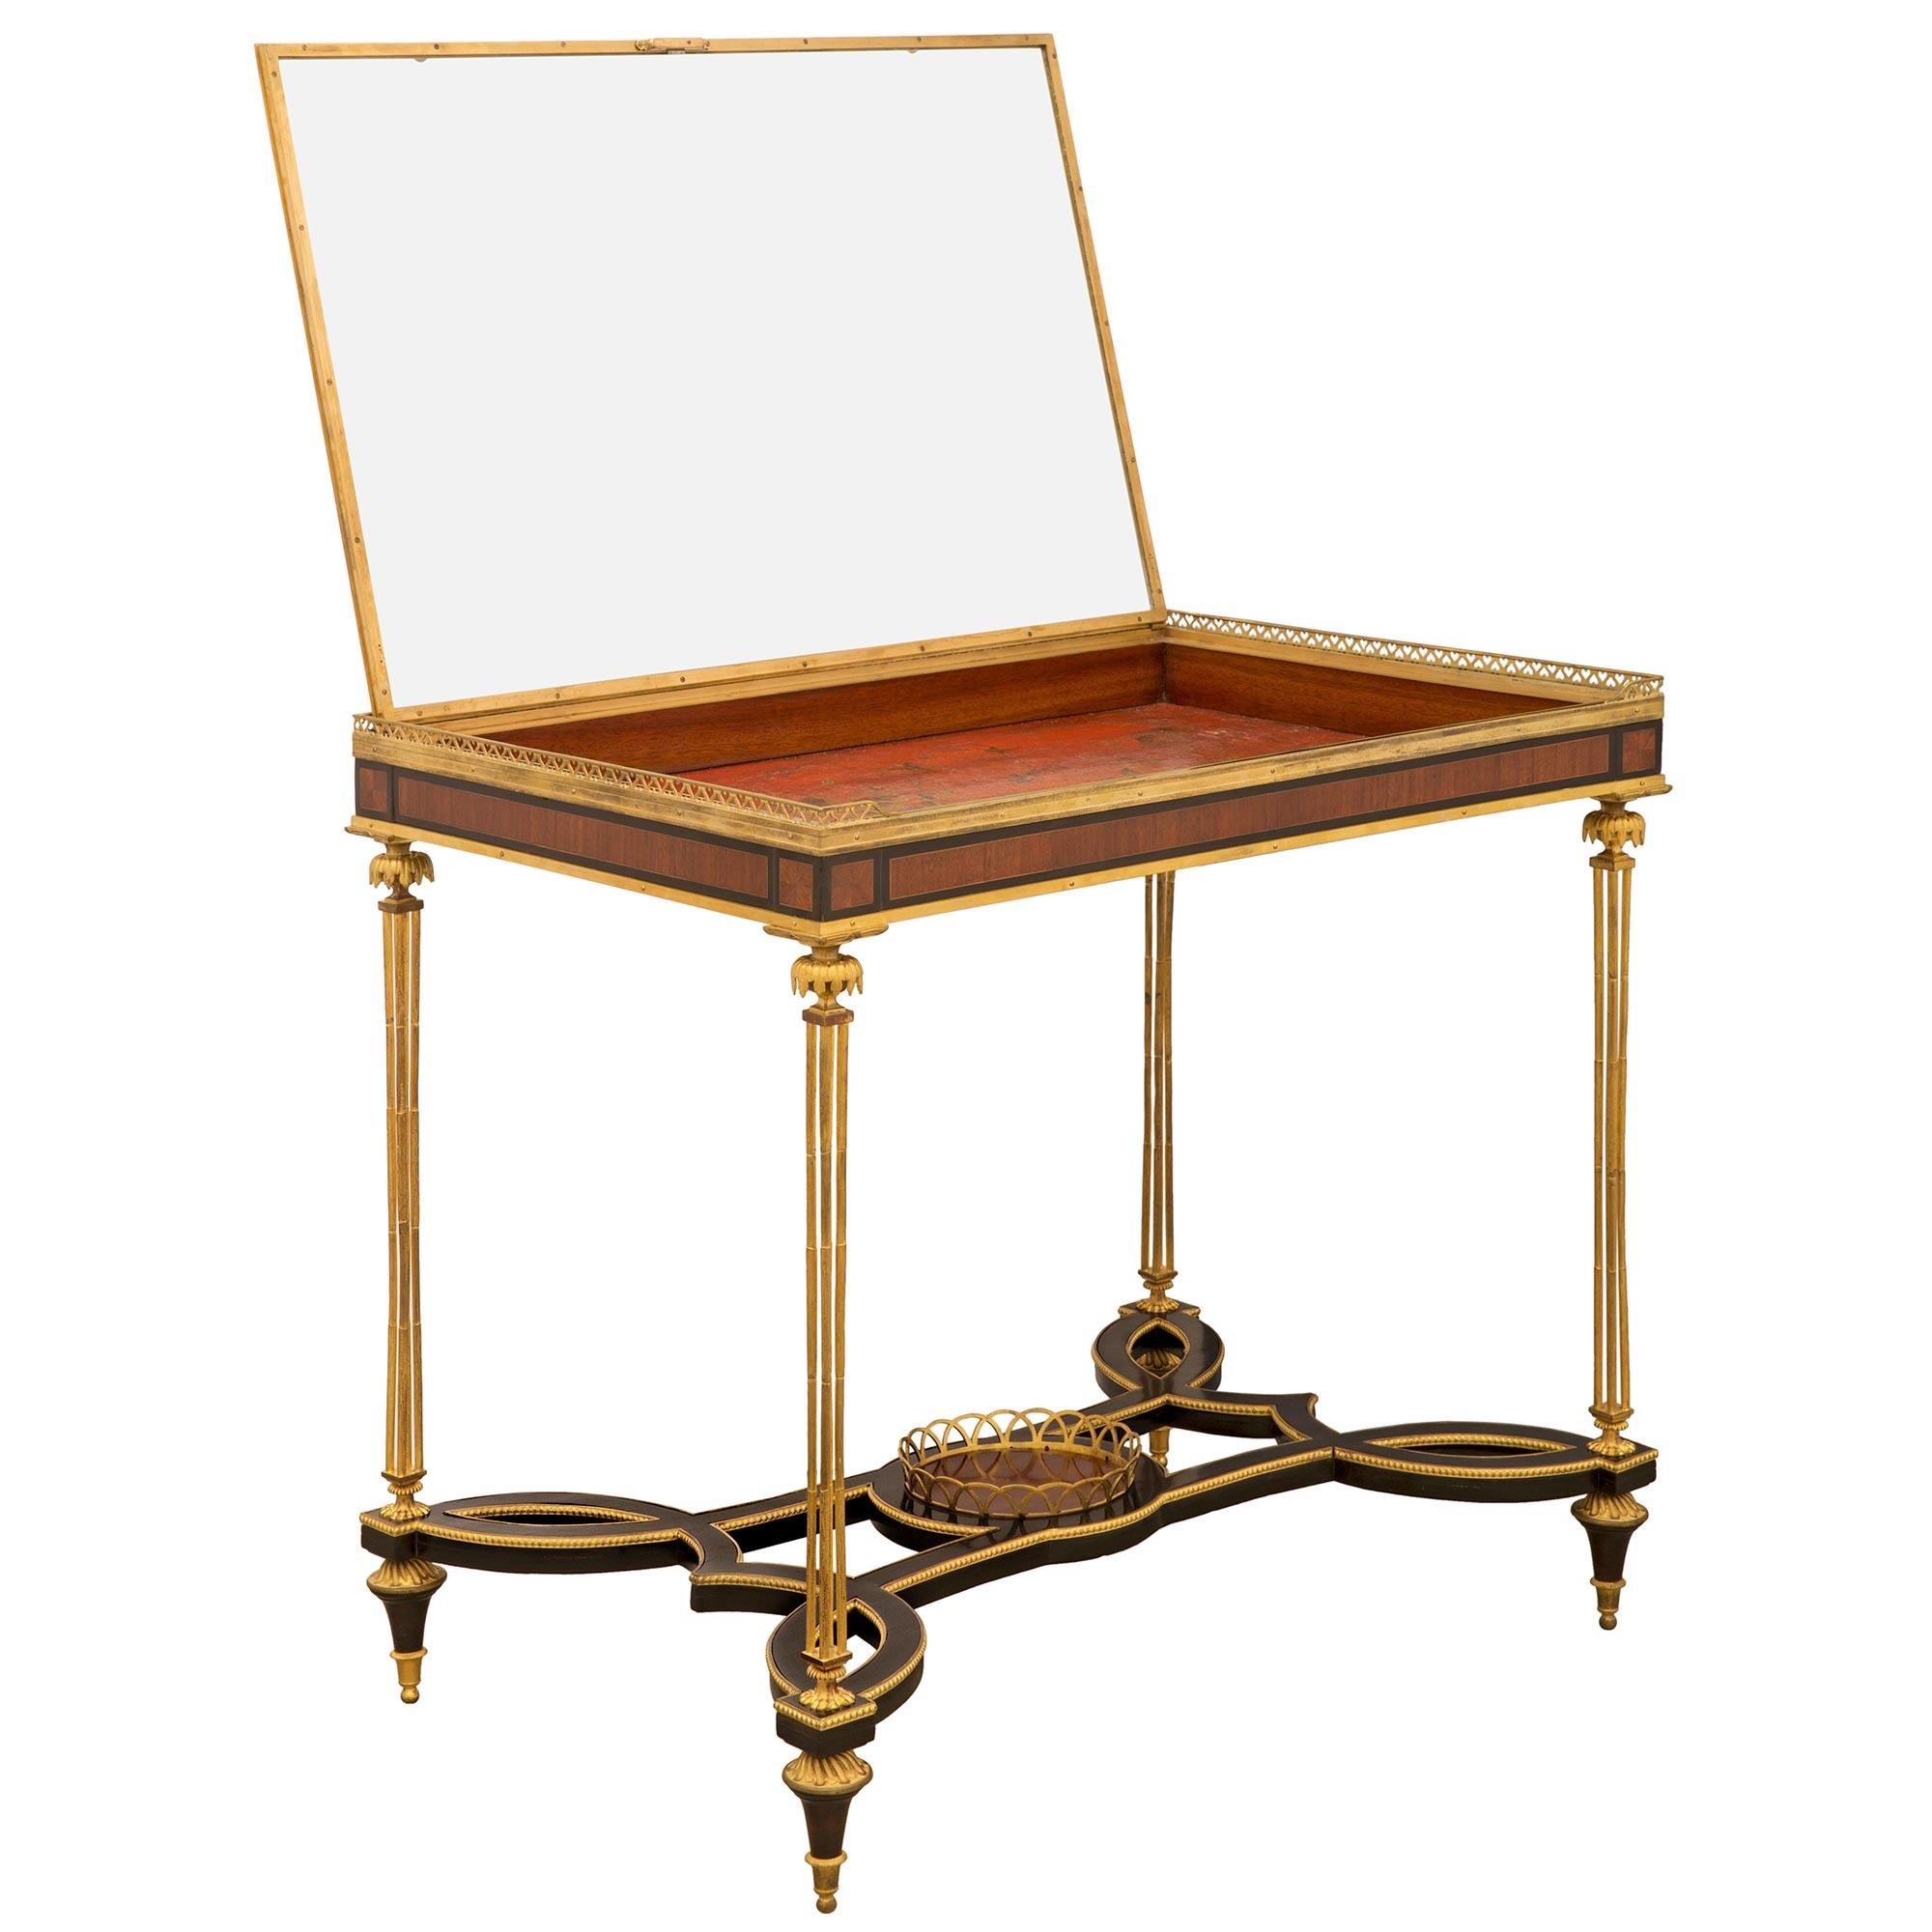 French Mid-19th Century Louis XVI Style Kingwood and Ormolu Display Table For Sale 1